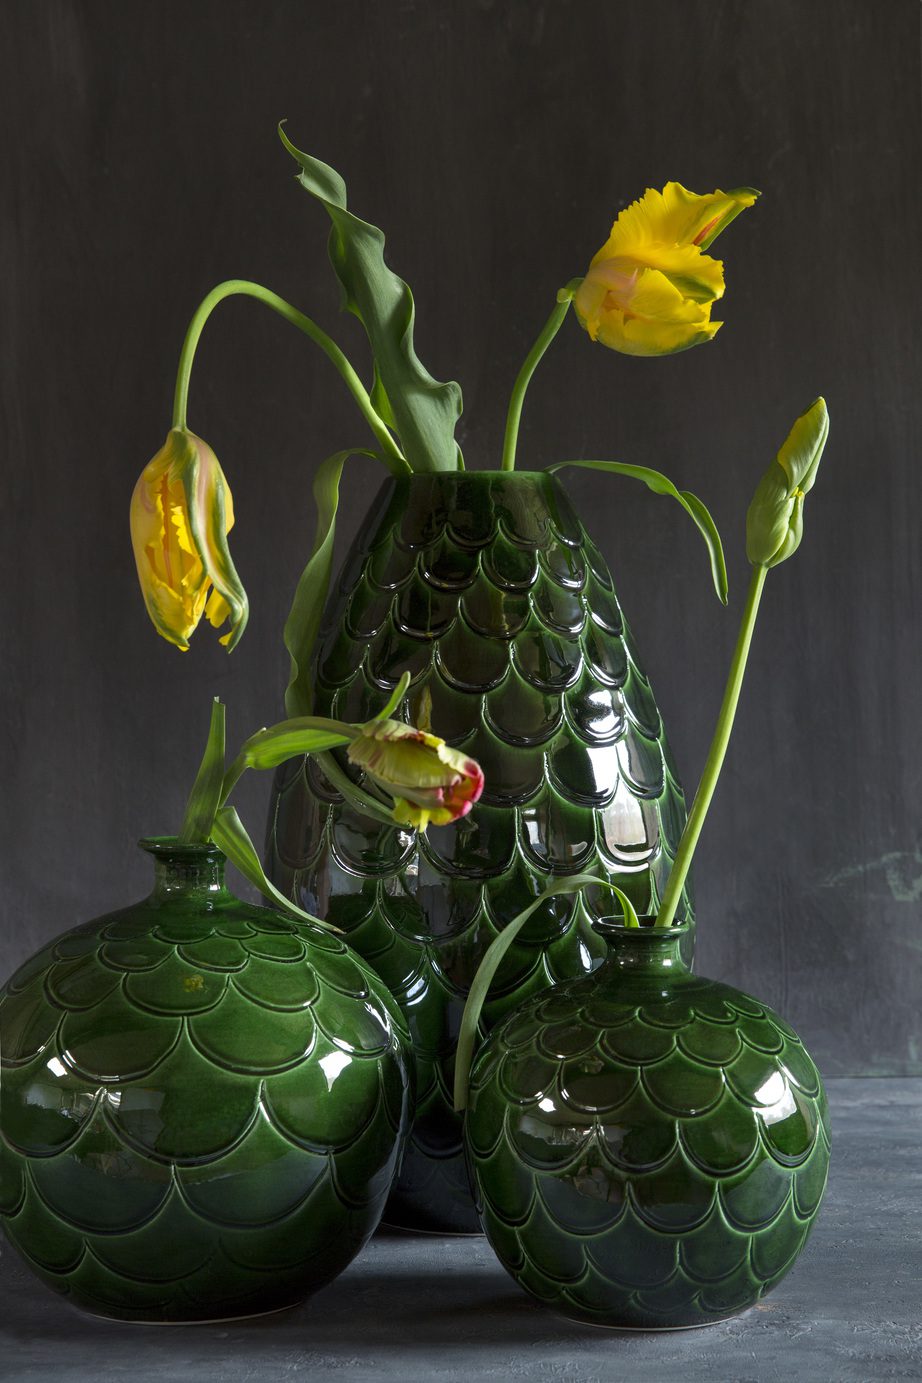 Two round-shaped and one cone-shaped green glazed vases with flowers.